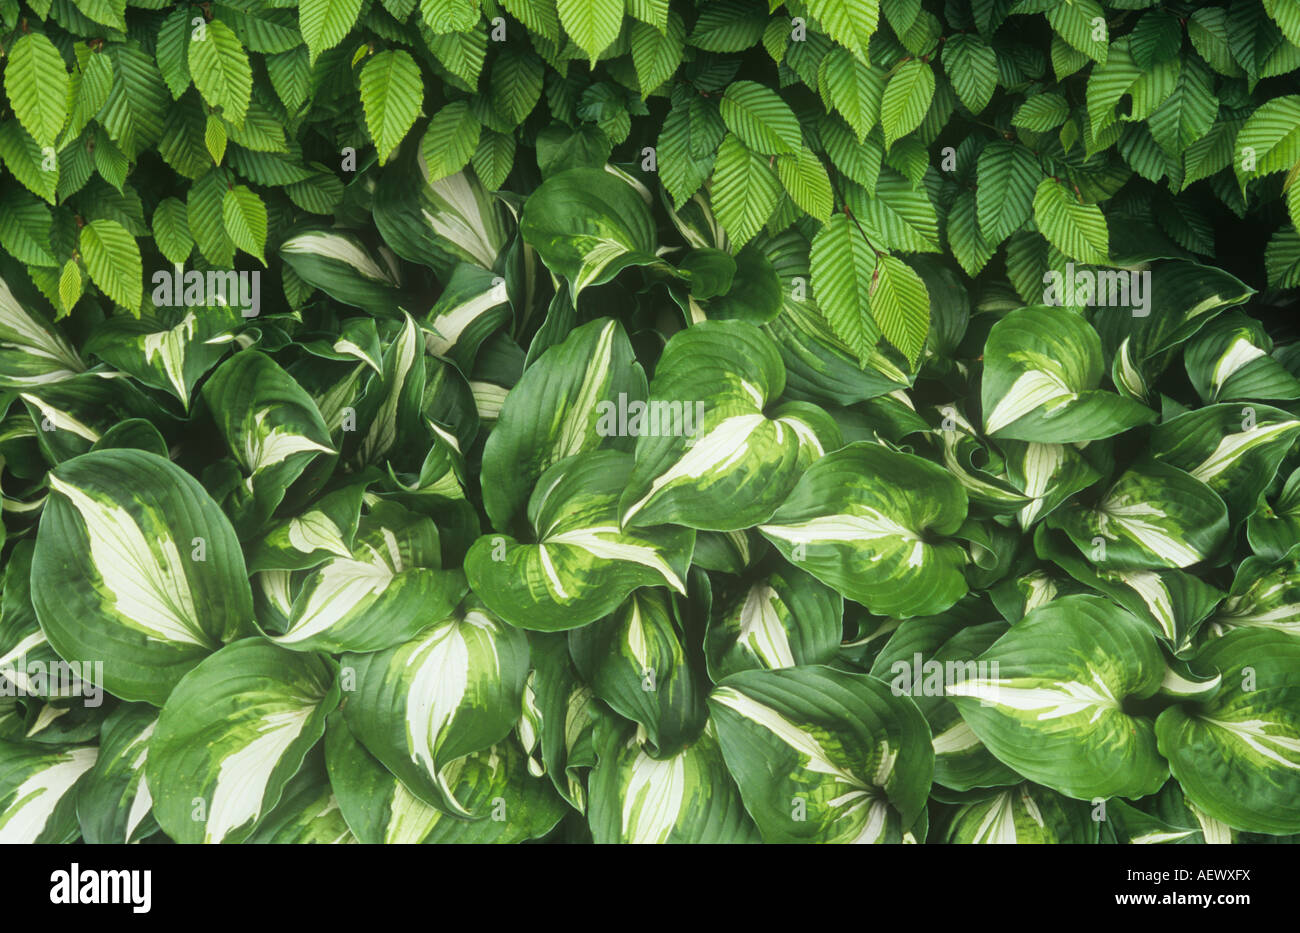 Cream and green leaves of Hosta fortunei Albopicta or Plantain lily with leaves of Hornbeam or Carpinus betulus hedge above Stock Photo